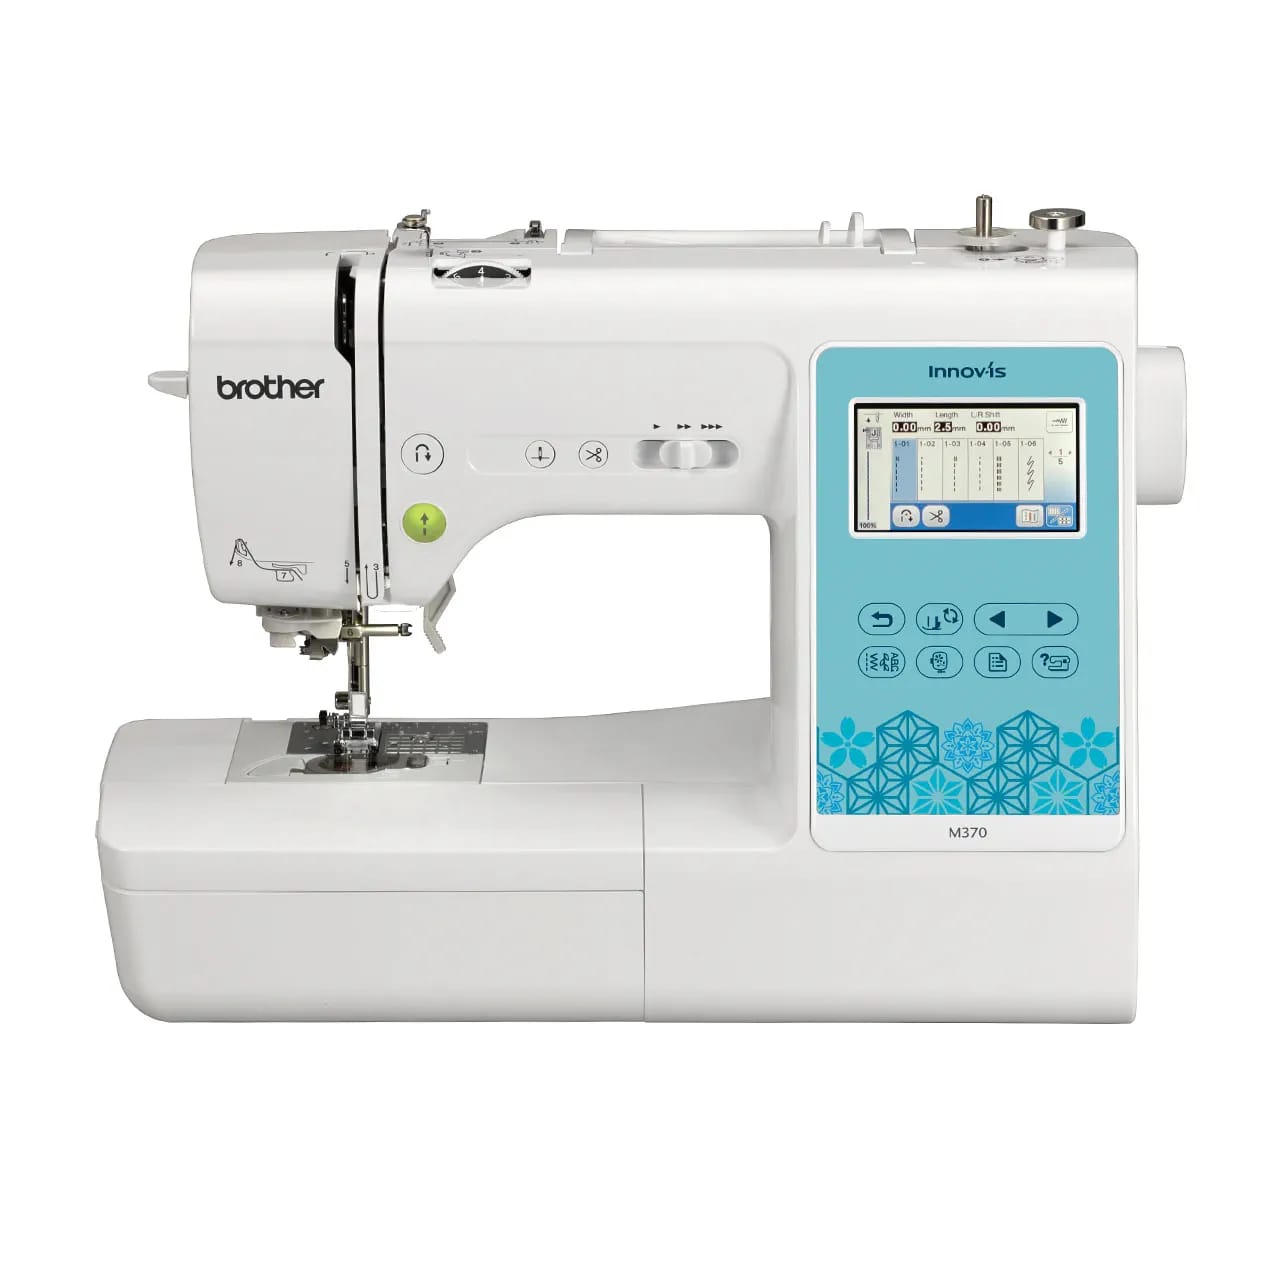 Brother M370- Innov-is Sewing & Embroidery Machine